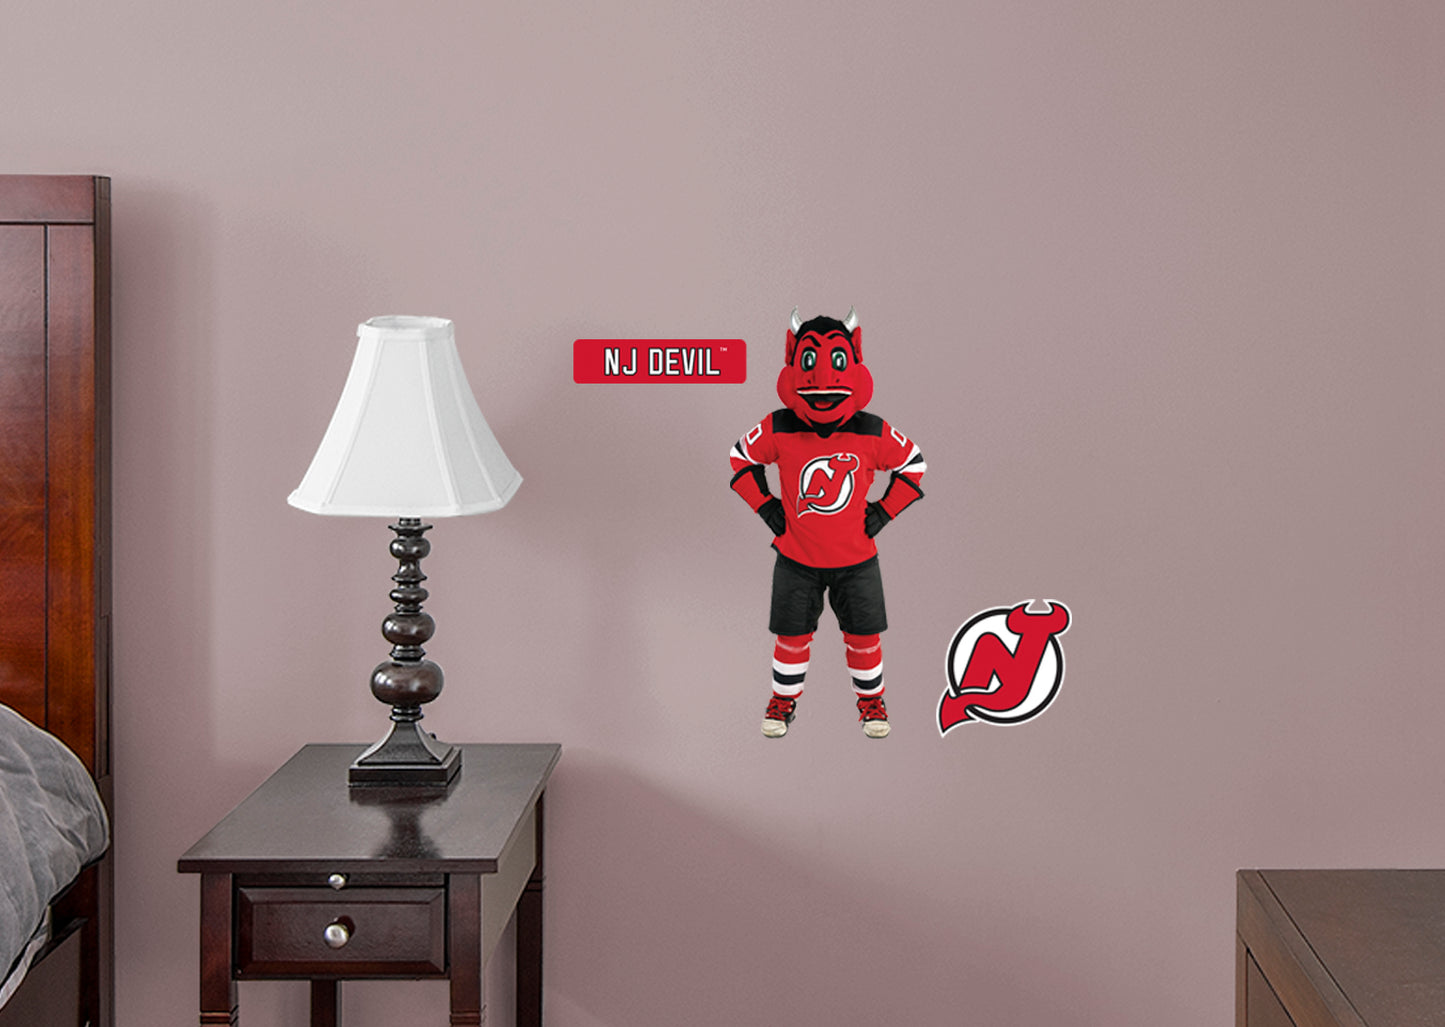 New Jersey Devils: NJ Devil  Mascot        - Officially Licensed NHL Removable Wall   Adhesive Decal